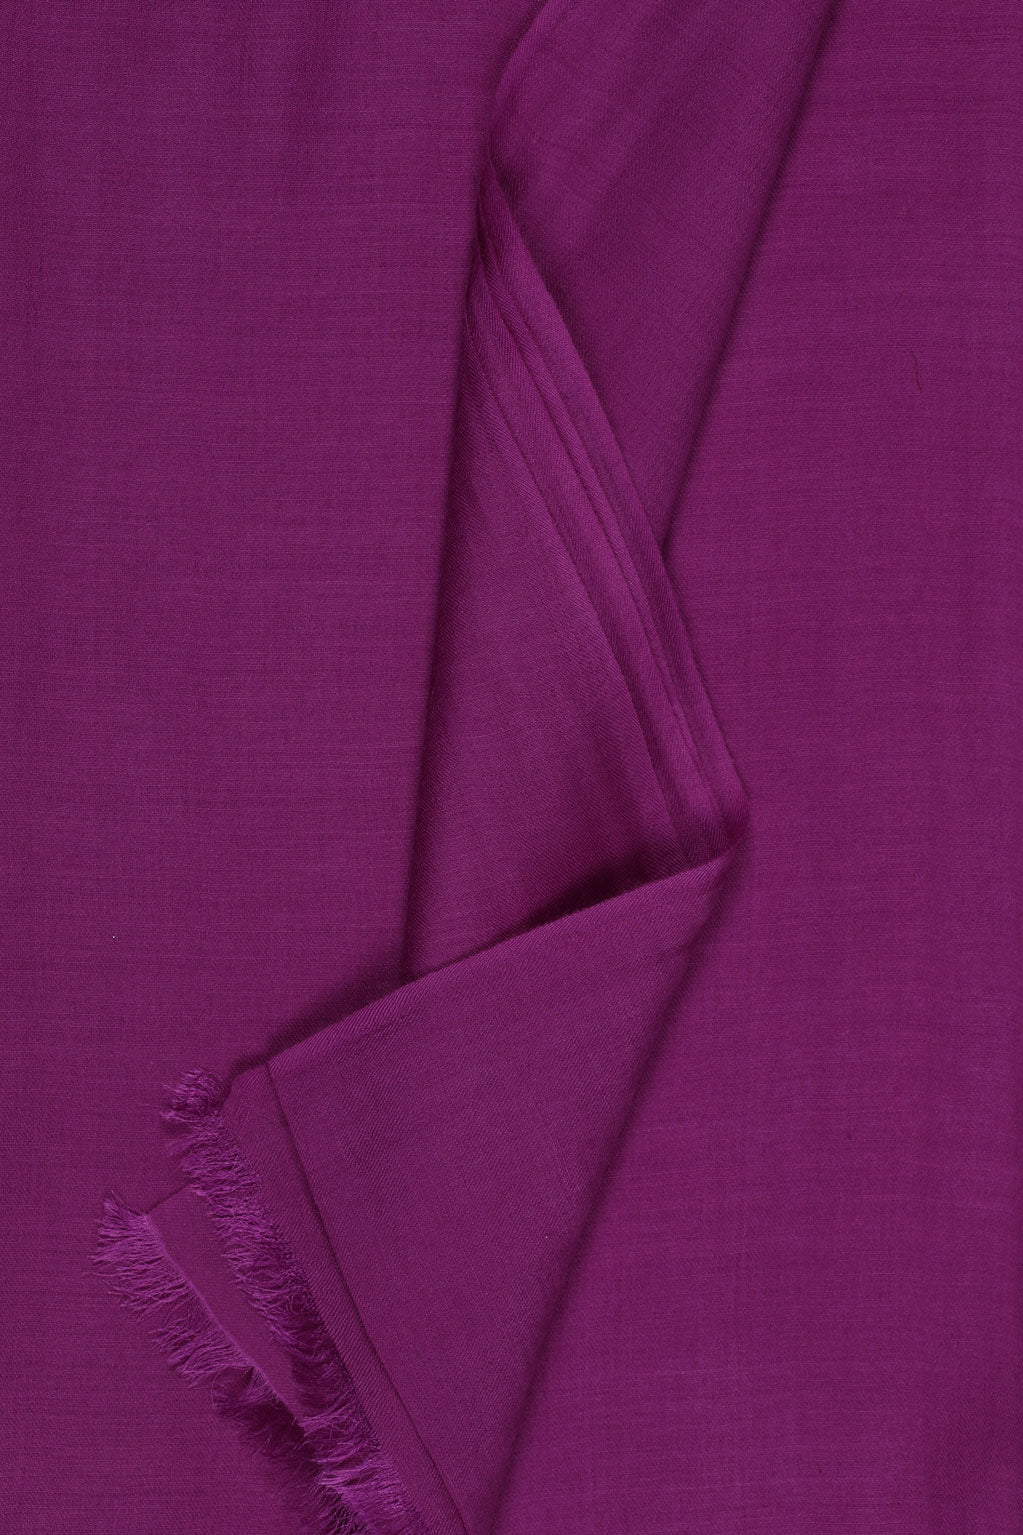 Lightweight Radiant Orchid Cashmere Scarf